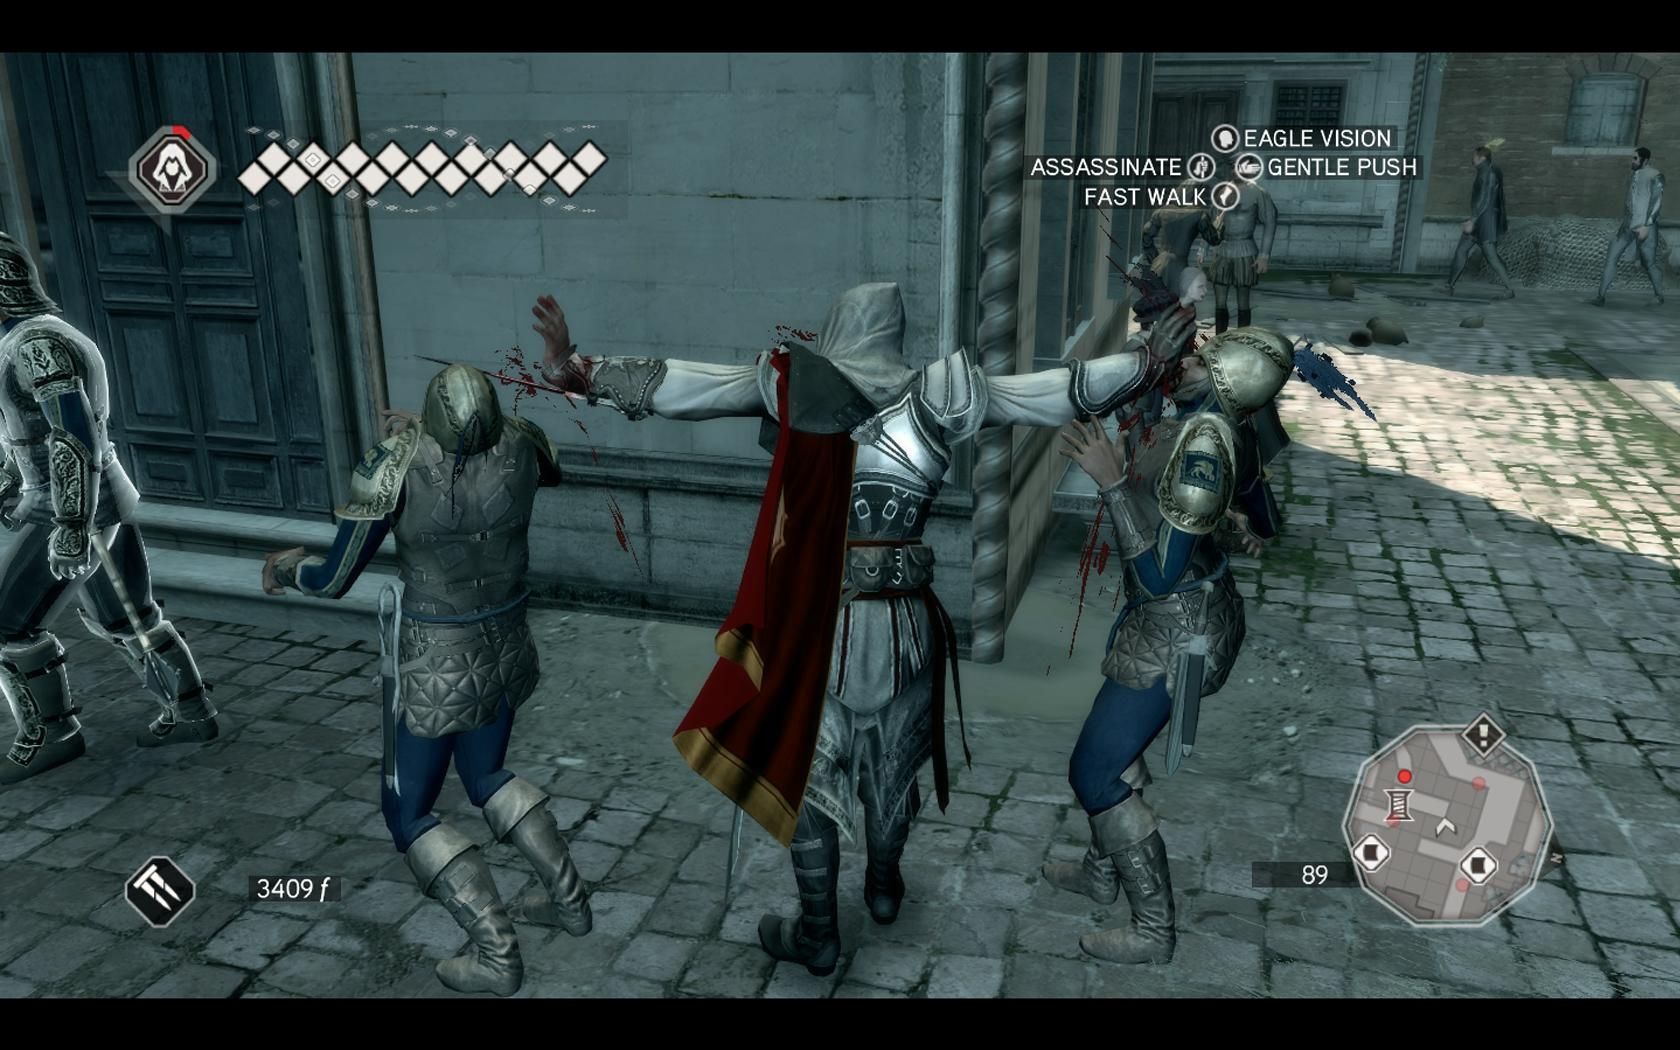 Assassin's Creed 2 Combat system